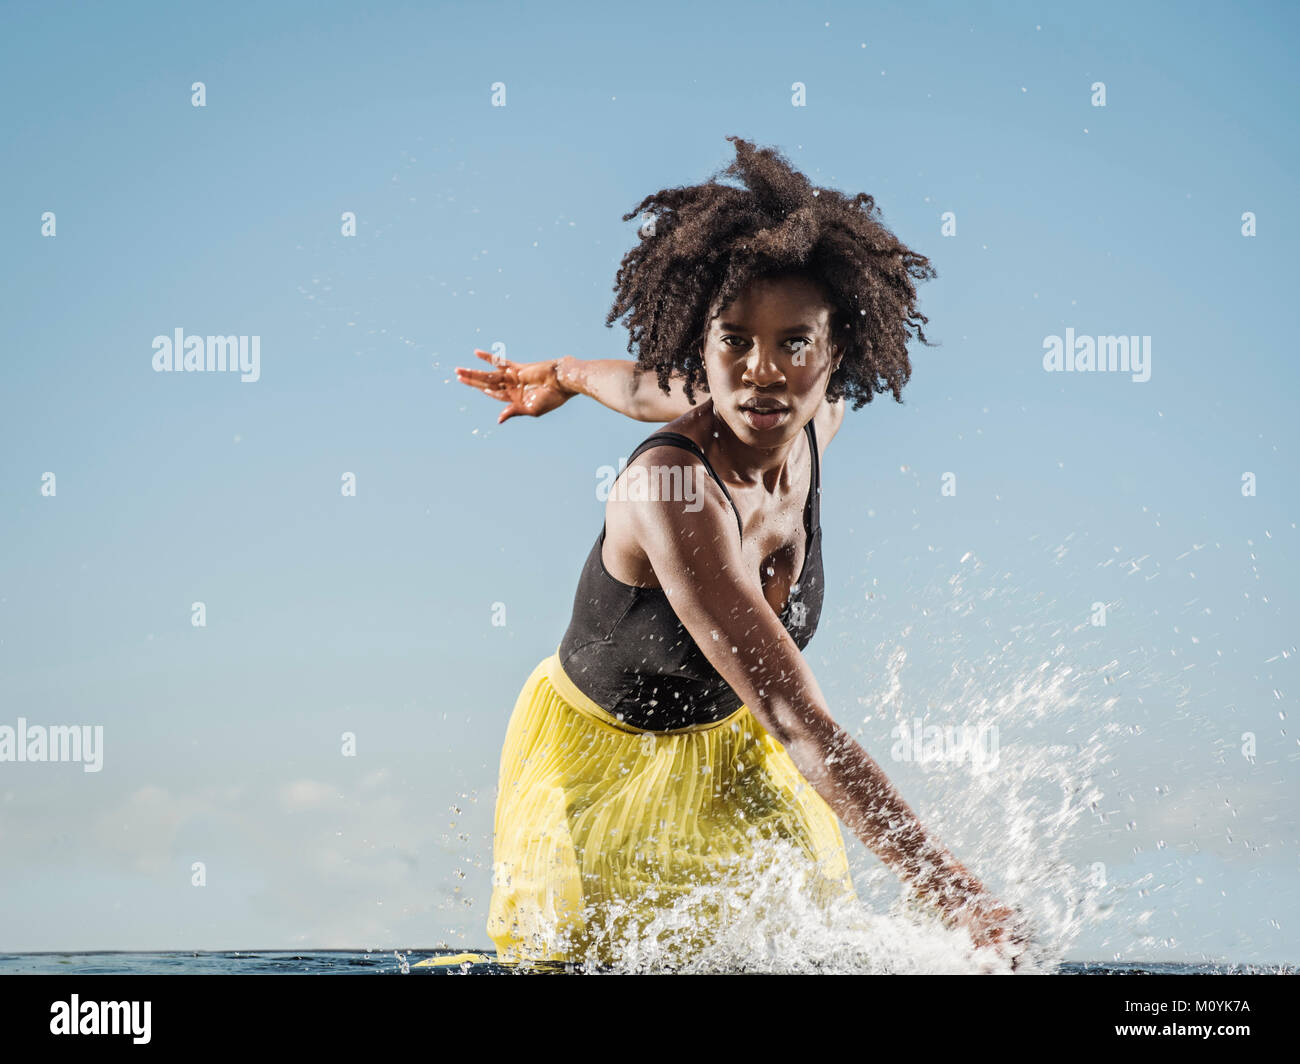 Black woman splashing in water Banque D'Images